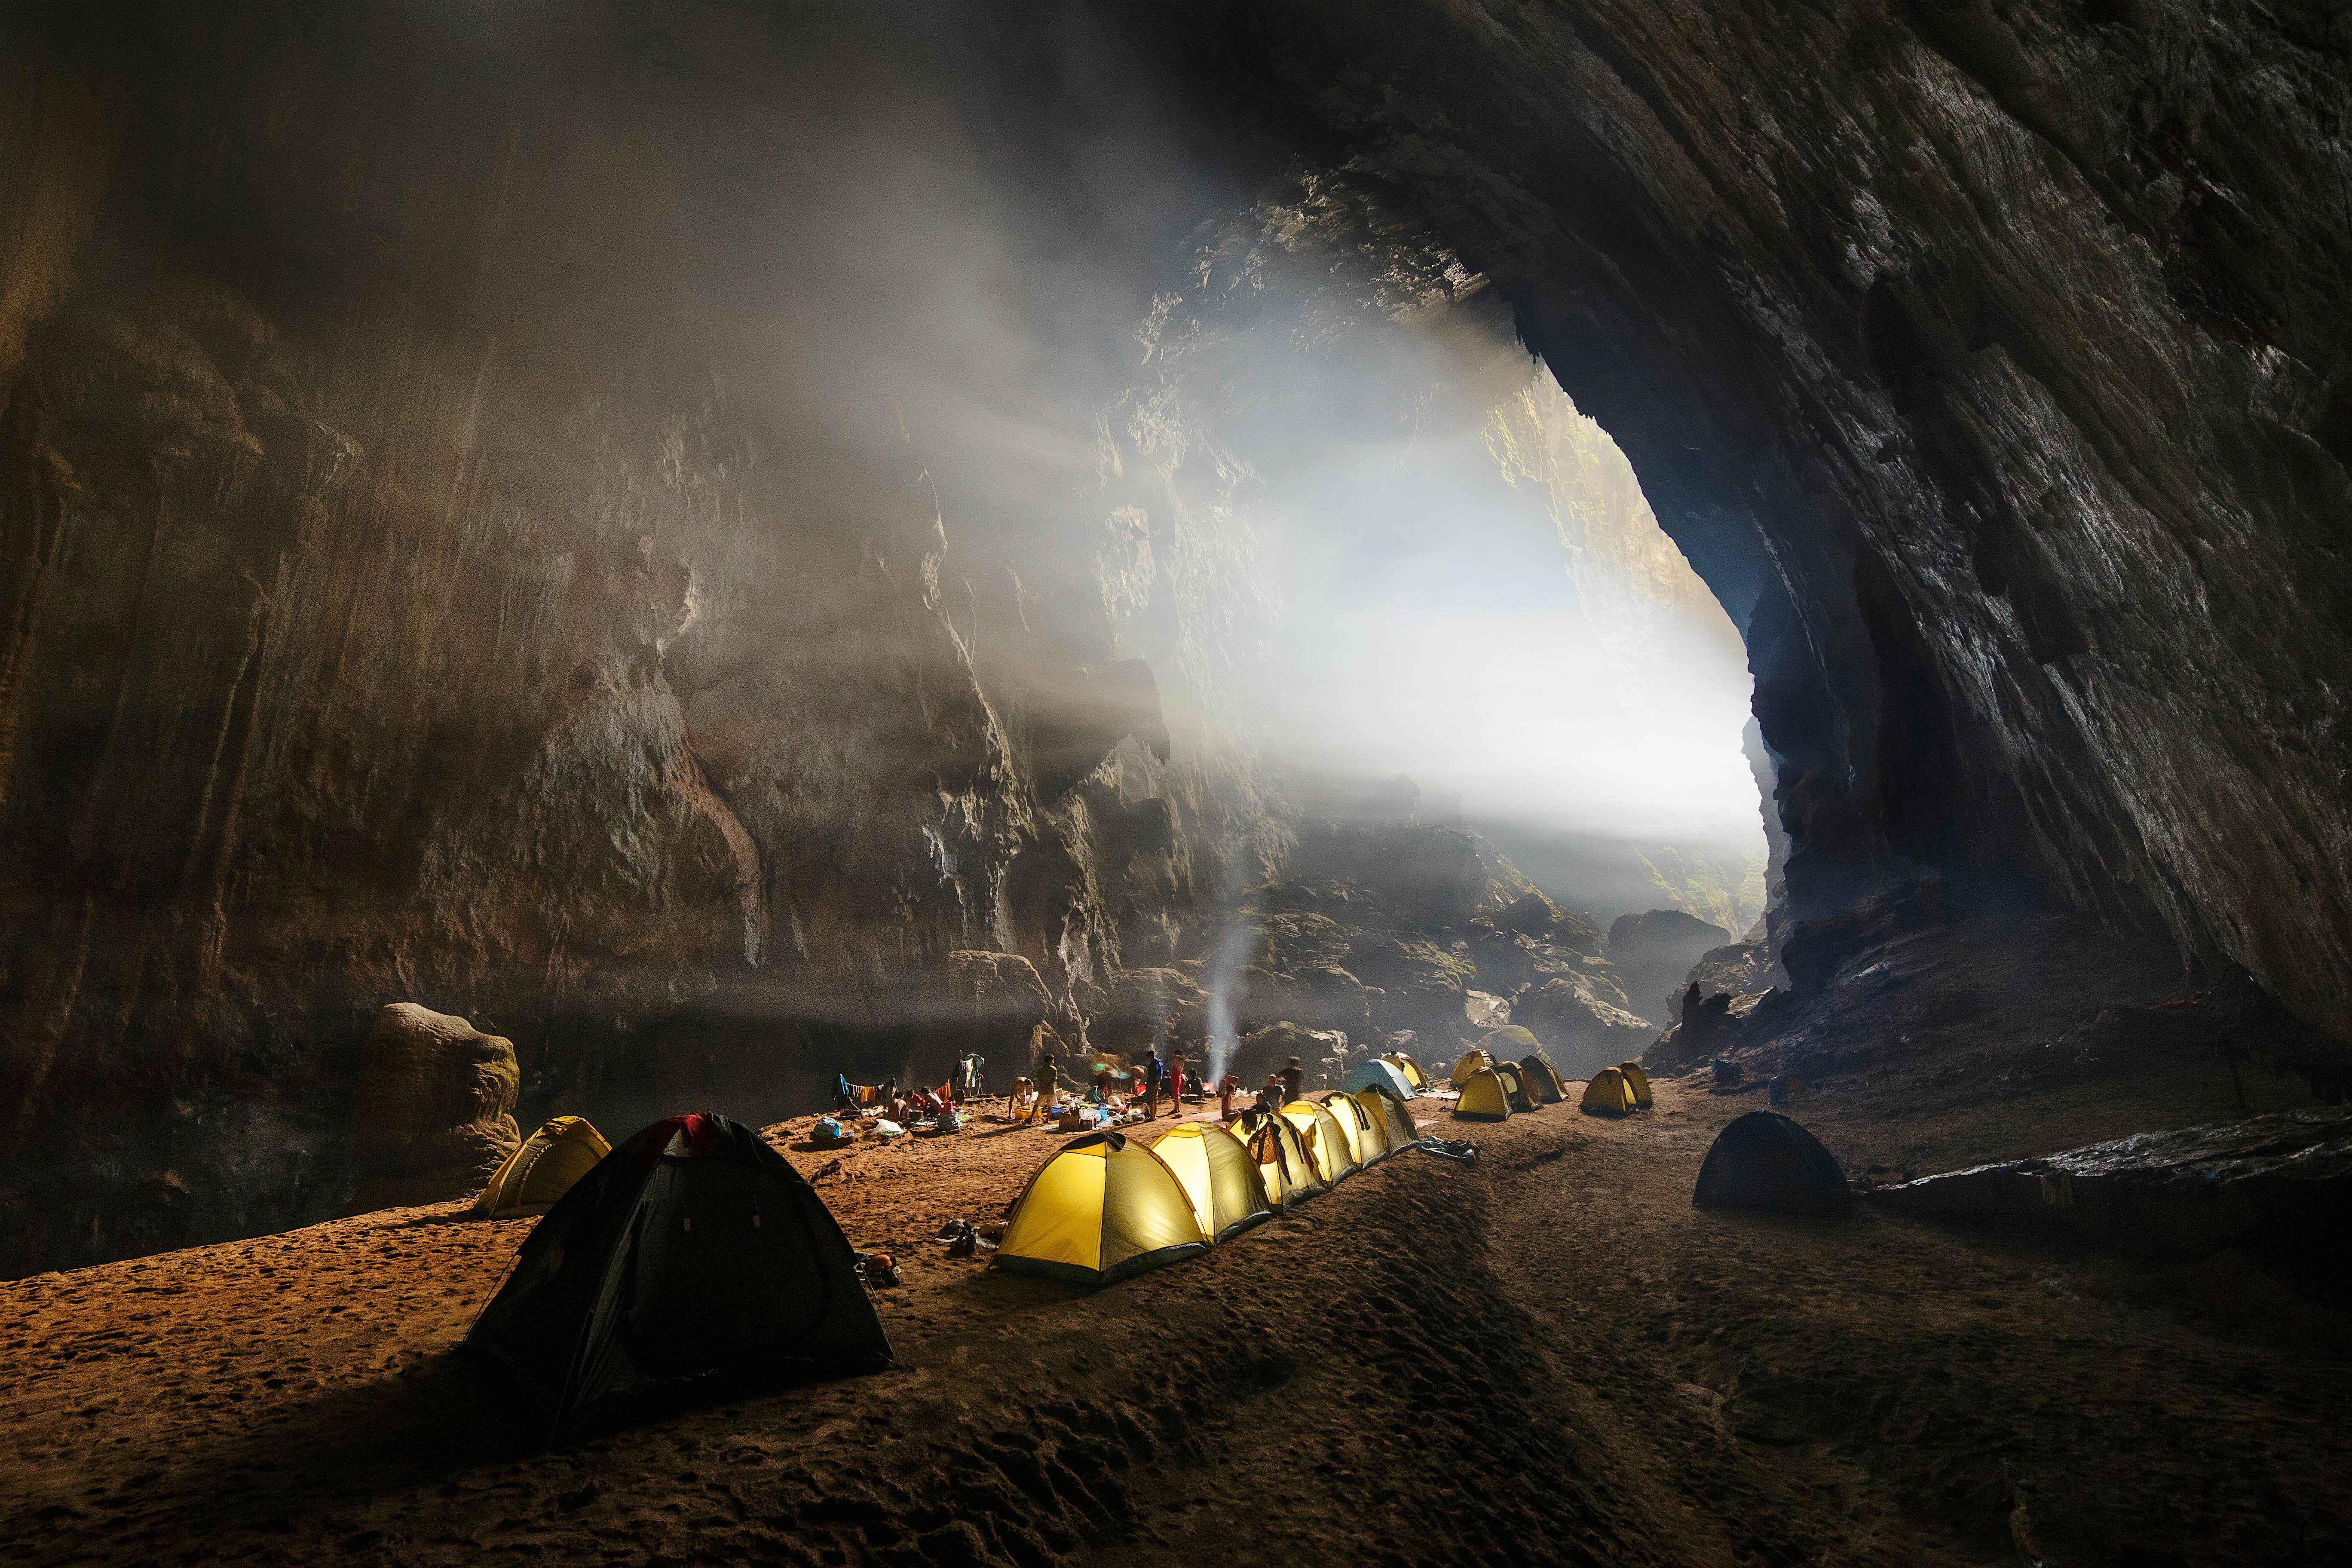 A row of tents is lined up on the rock in the cave, while sunlight beams in through an opening.